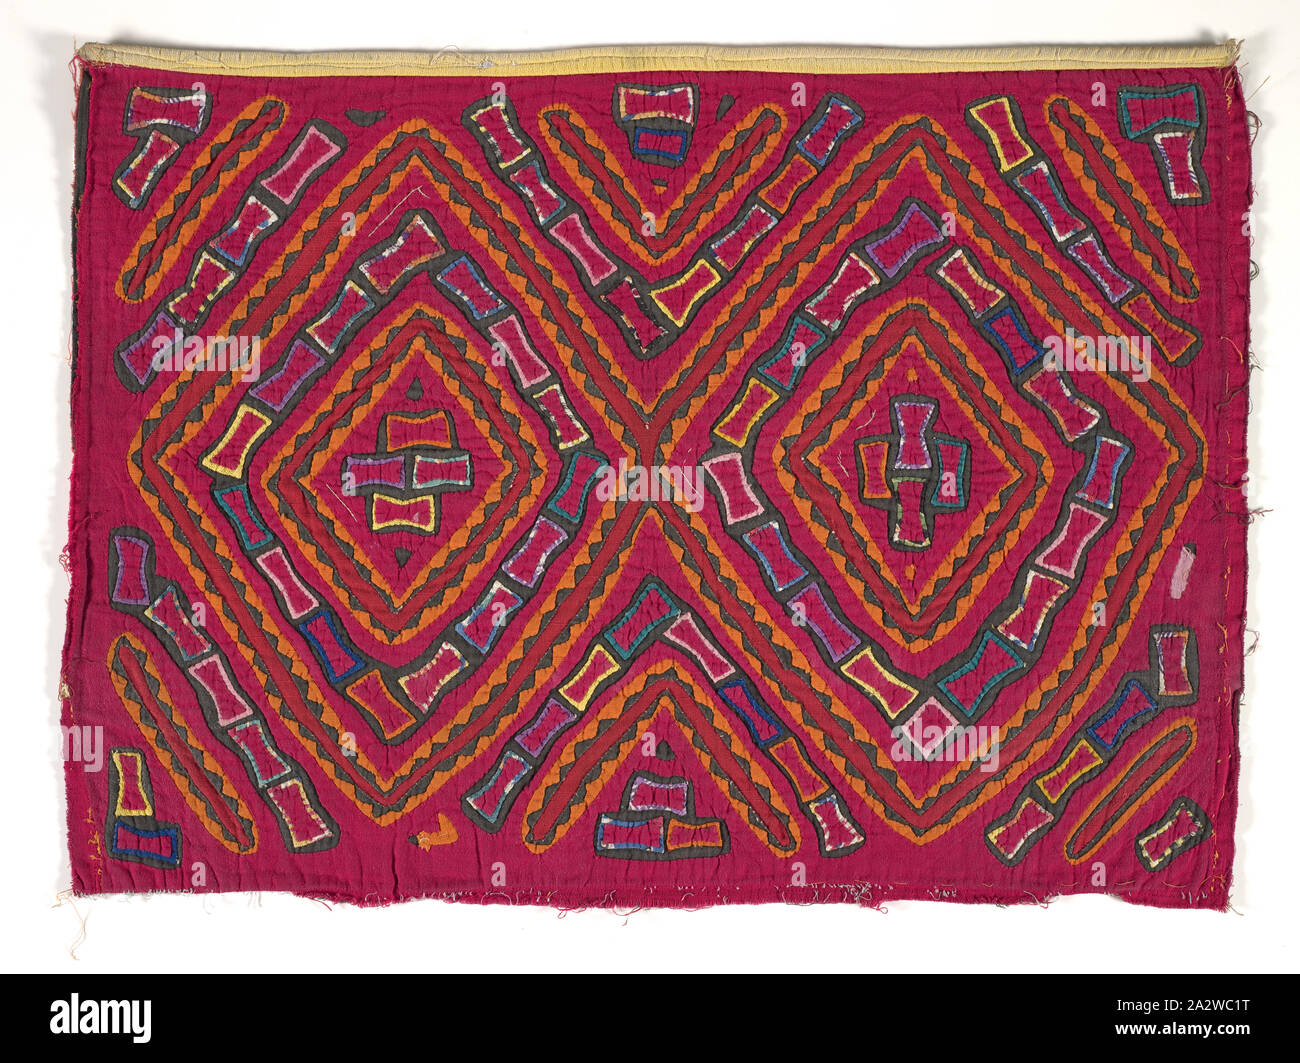 shirt panel (mola), Kuna people, about 1950s, appliqued cotton, 17-1/4 x 23-5/8 in., Textile and Fashion Arts Stock Photo